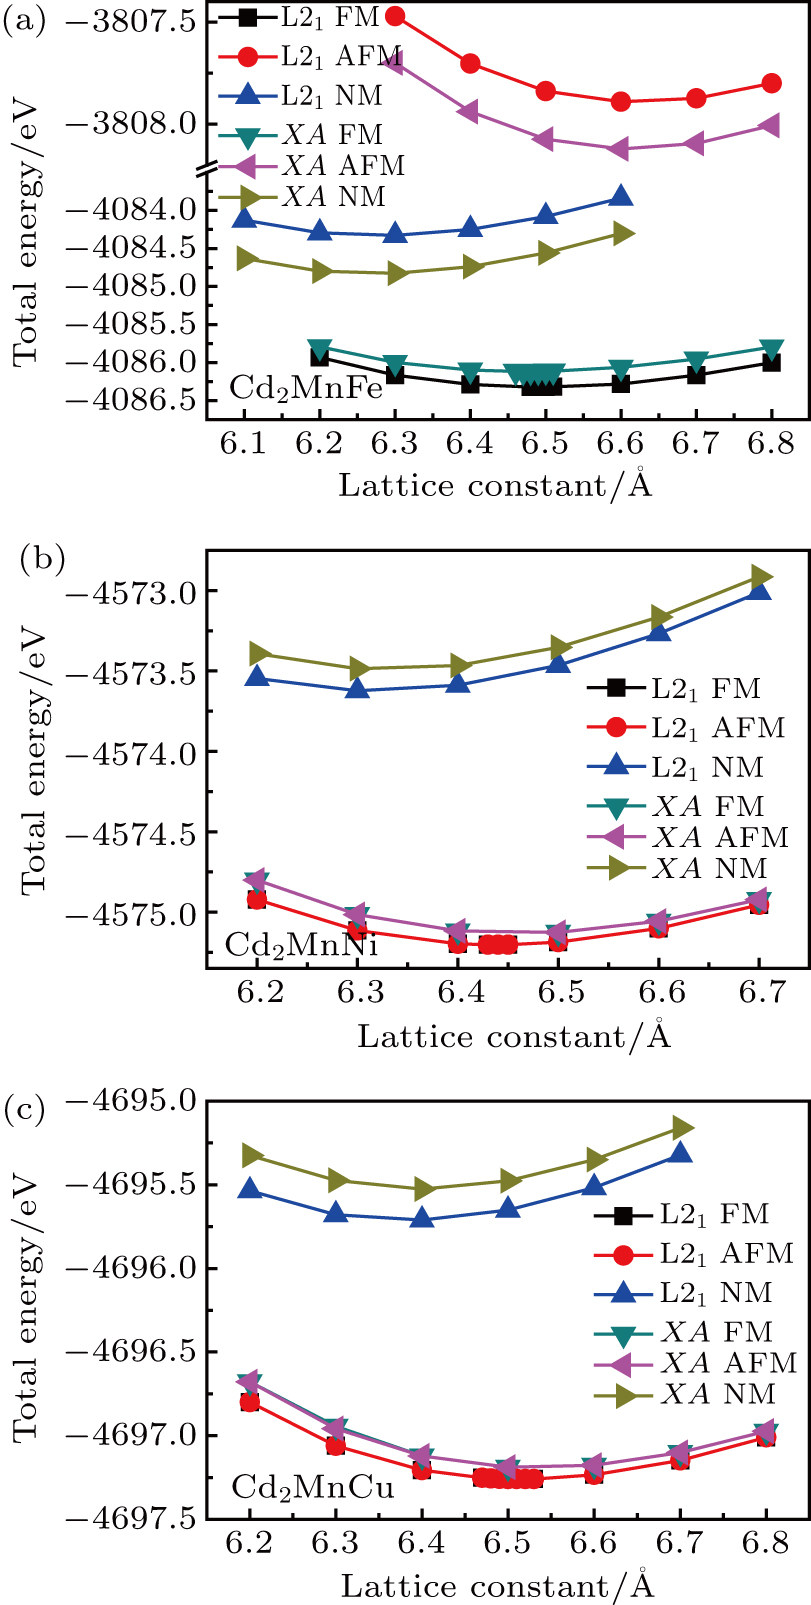 Calculated total energy as a function of lattice constant for (a) Cd2MnFe, (b) Cd2MnNi, and (c) Cd2MnCu with L21-type and XA-type structures in FM, AFM, and NM states, respectively.